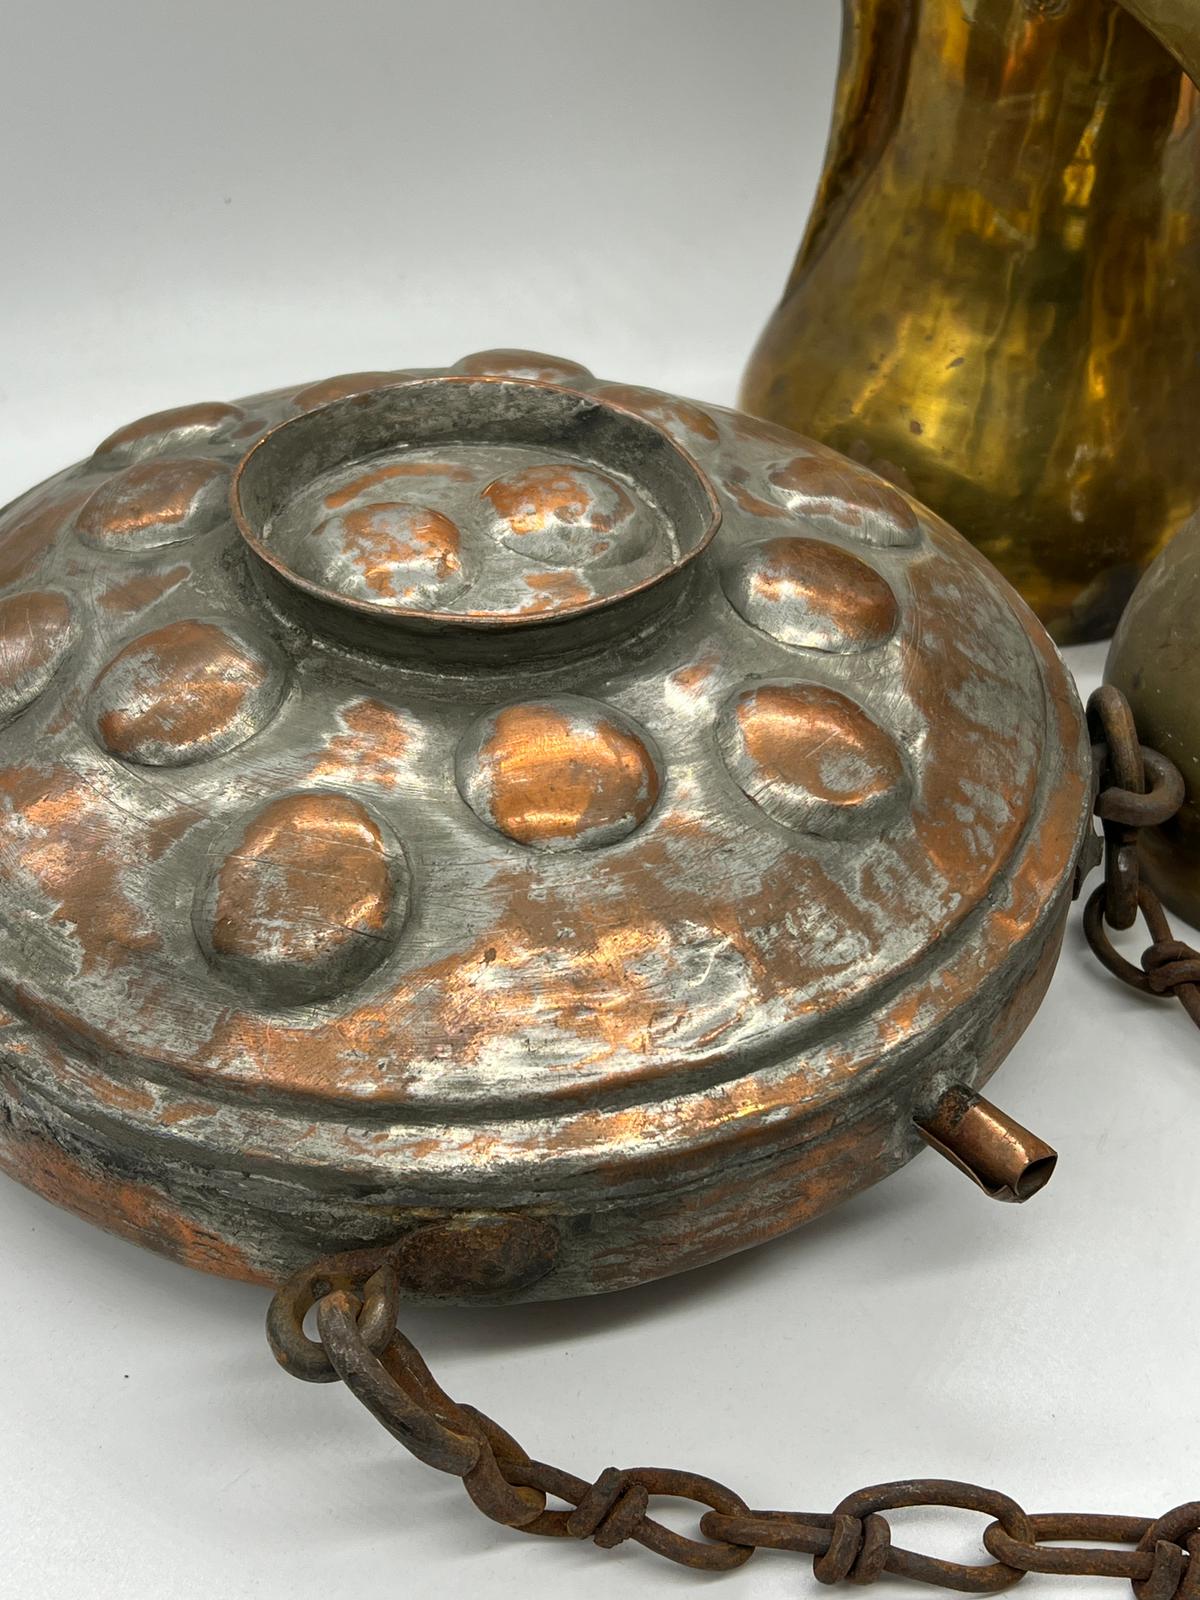 Two Middles Eastern coffee pots and a copper flask/container on a chain - Image 3 of 4